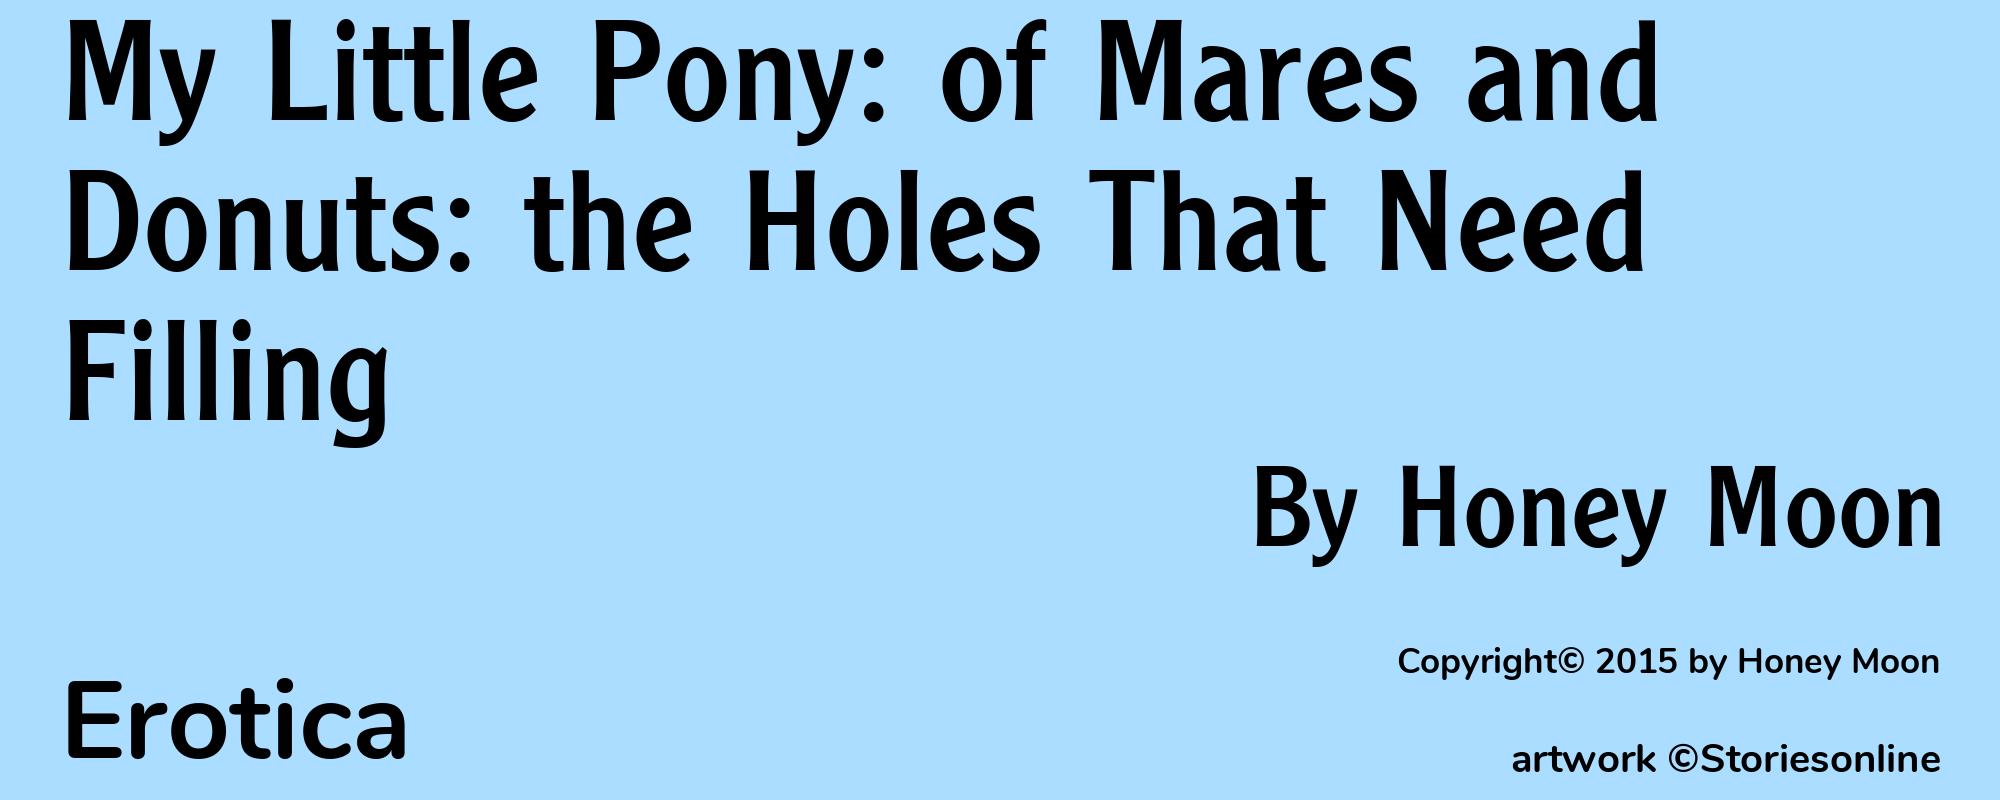 My Little Pony: of Mares and Donuts: the Holes That Need Filling - Cover